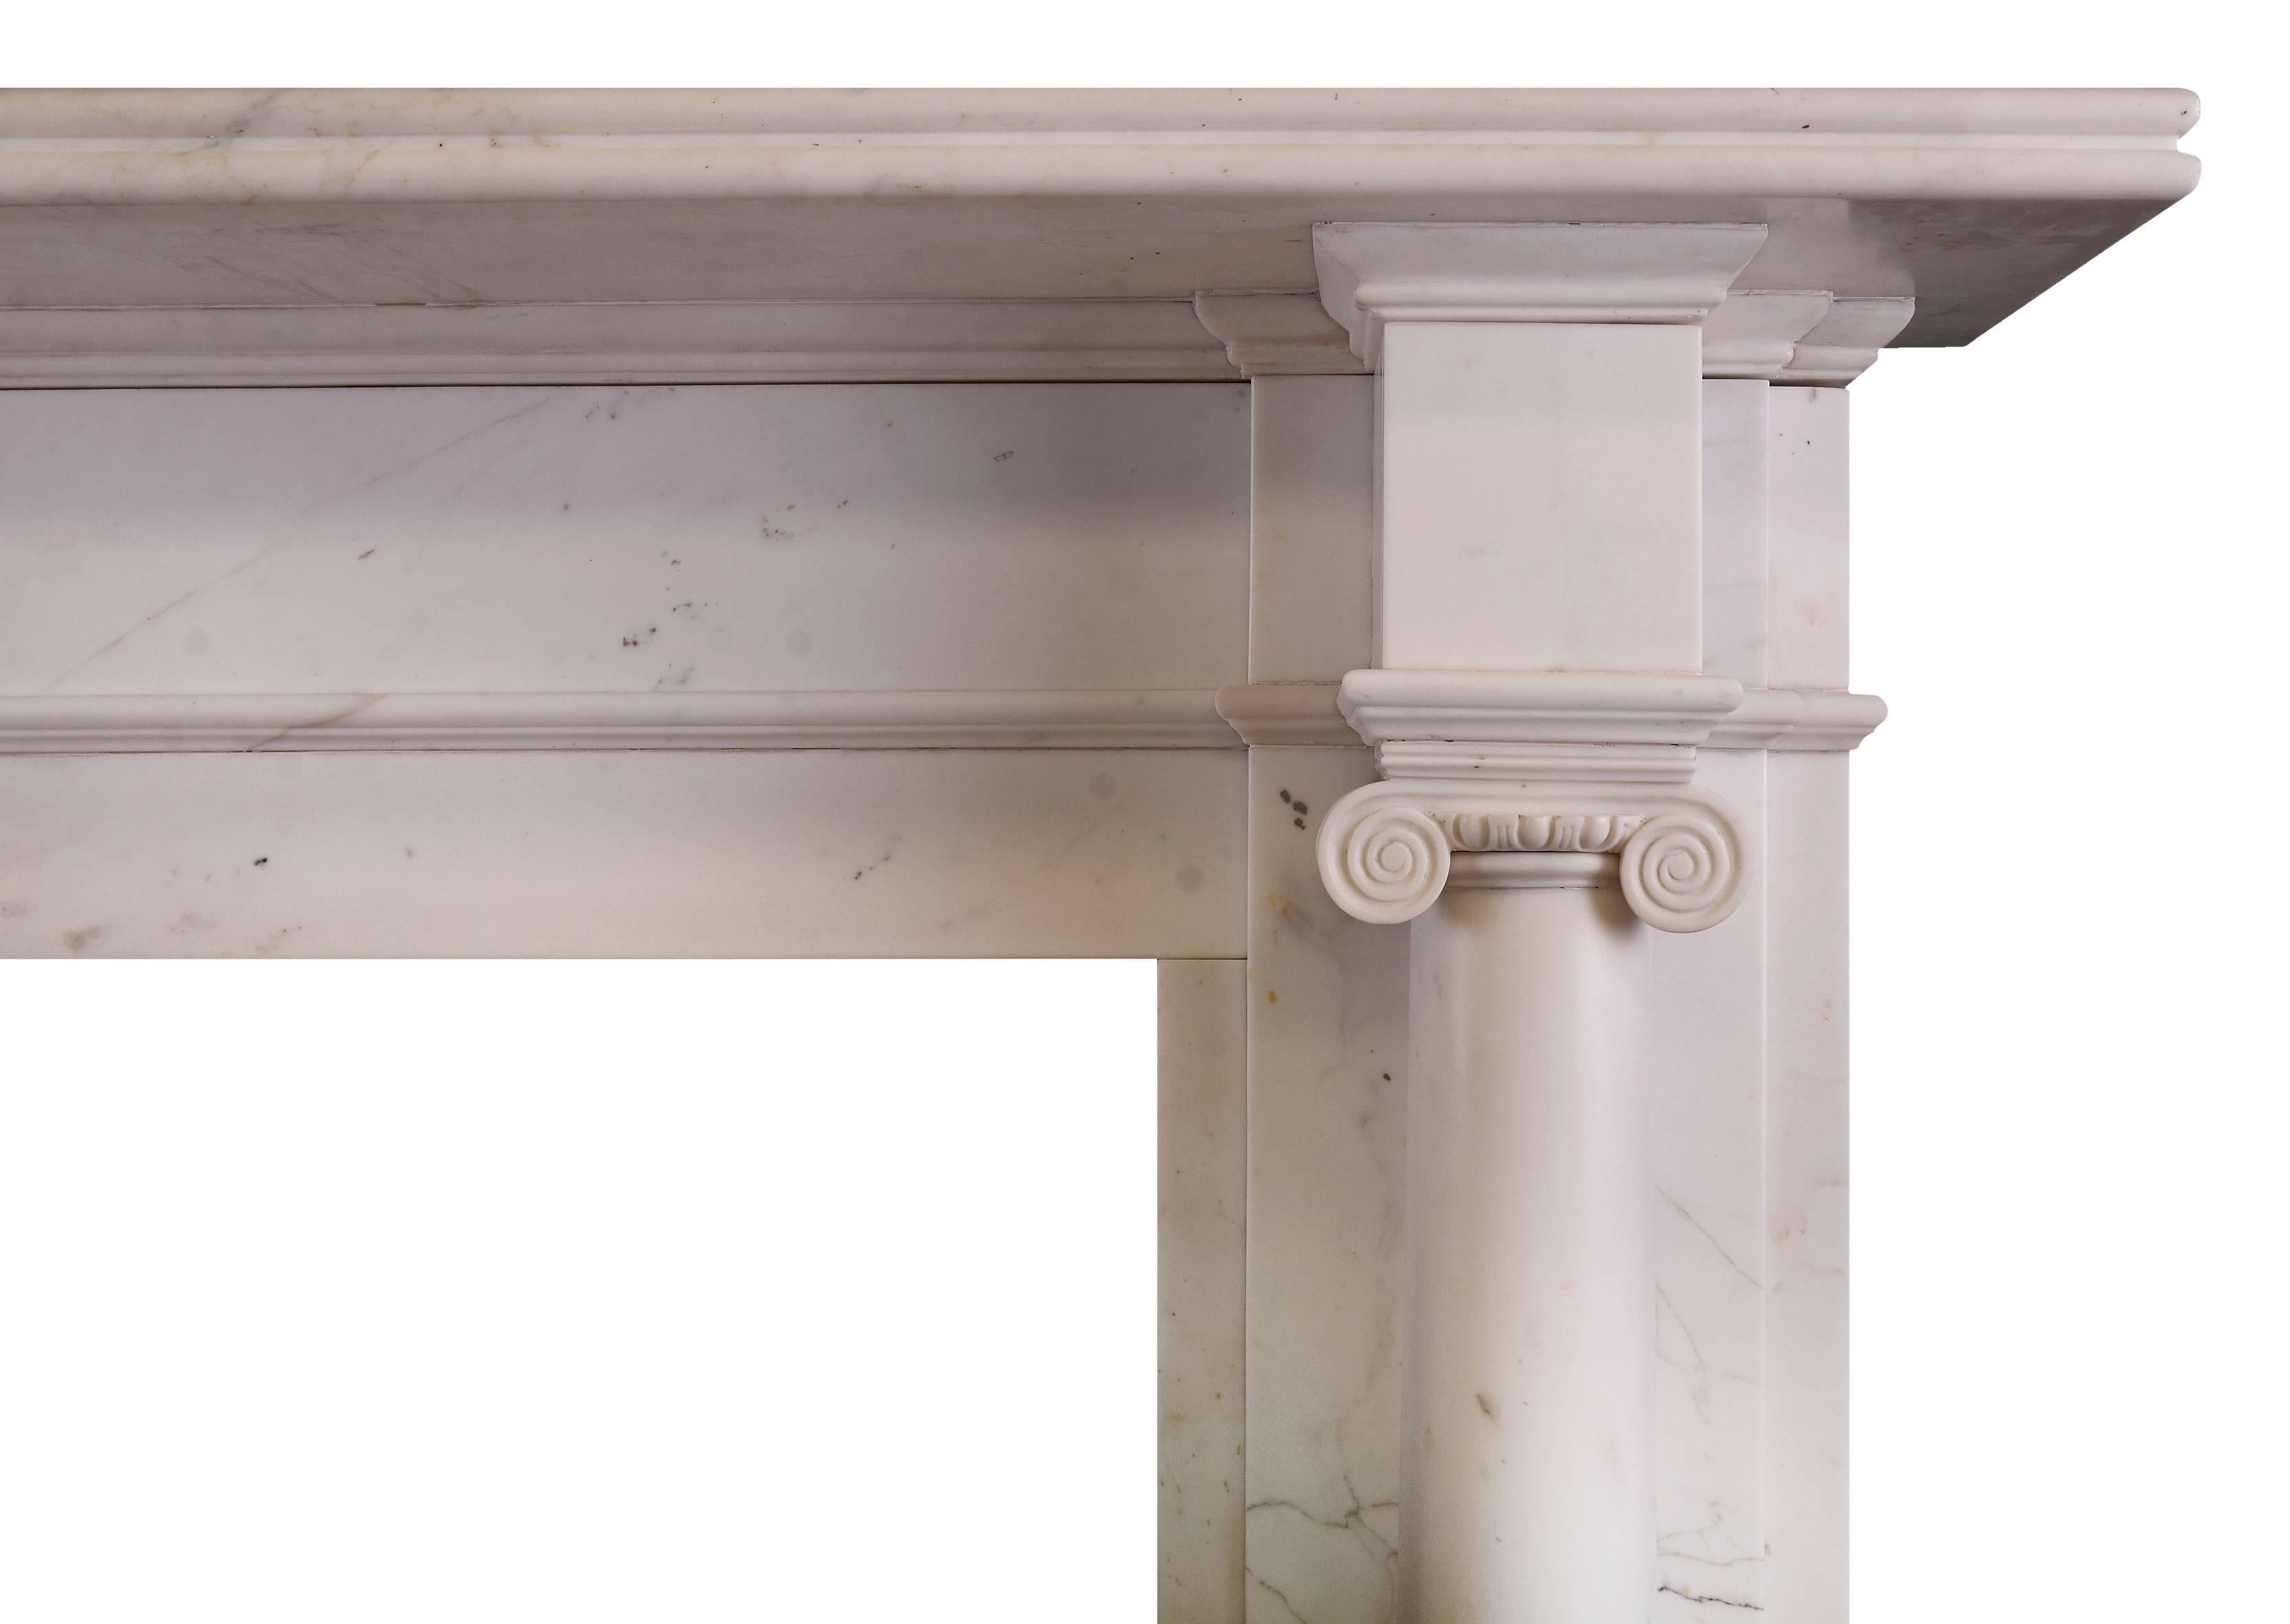 A 19th century English statuary marble fireplace in the Georgian manner. The full round columns, surmounted by Ionic capitals, plain frieze and double reeded shelf. A well proportioned piece.

Measurements:
Shelf Width: 1800 mm / 70 7/8 in
Overall